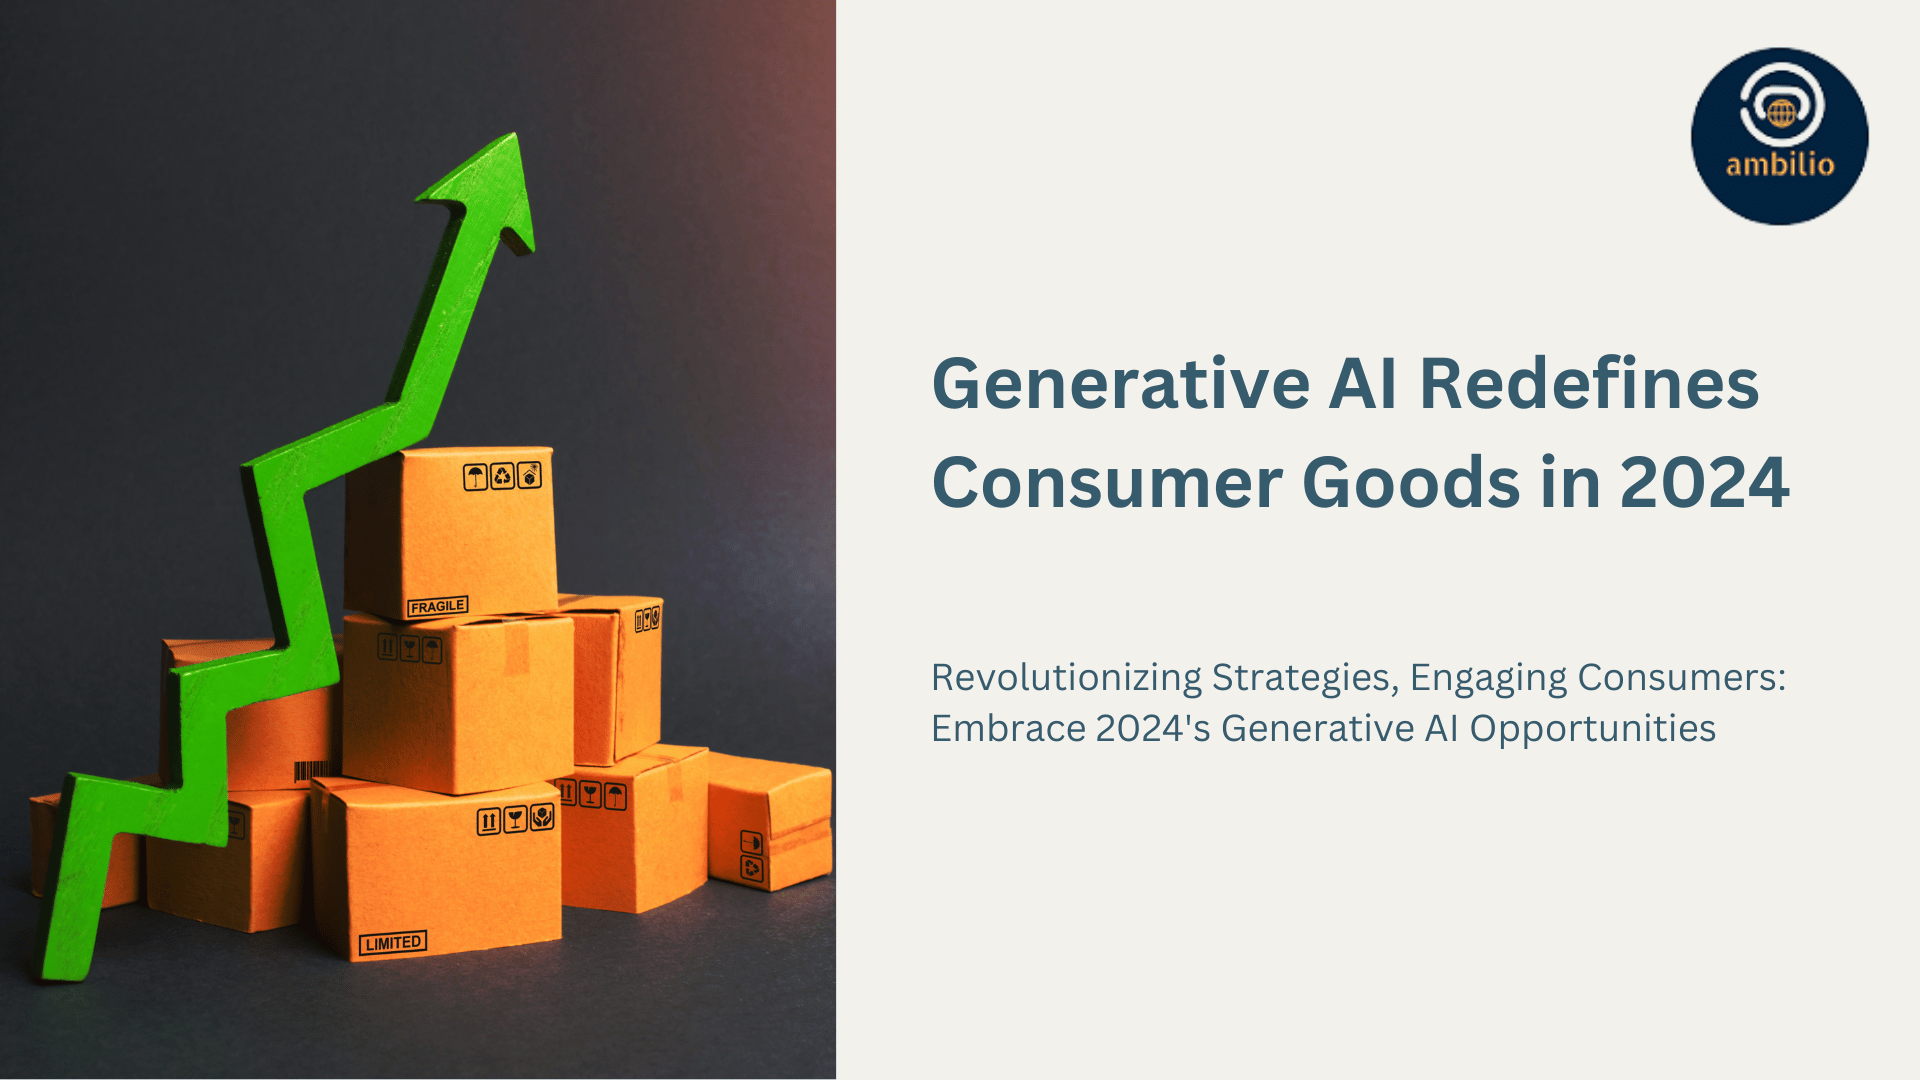 Generative AI Opportunities for Consumer Goods